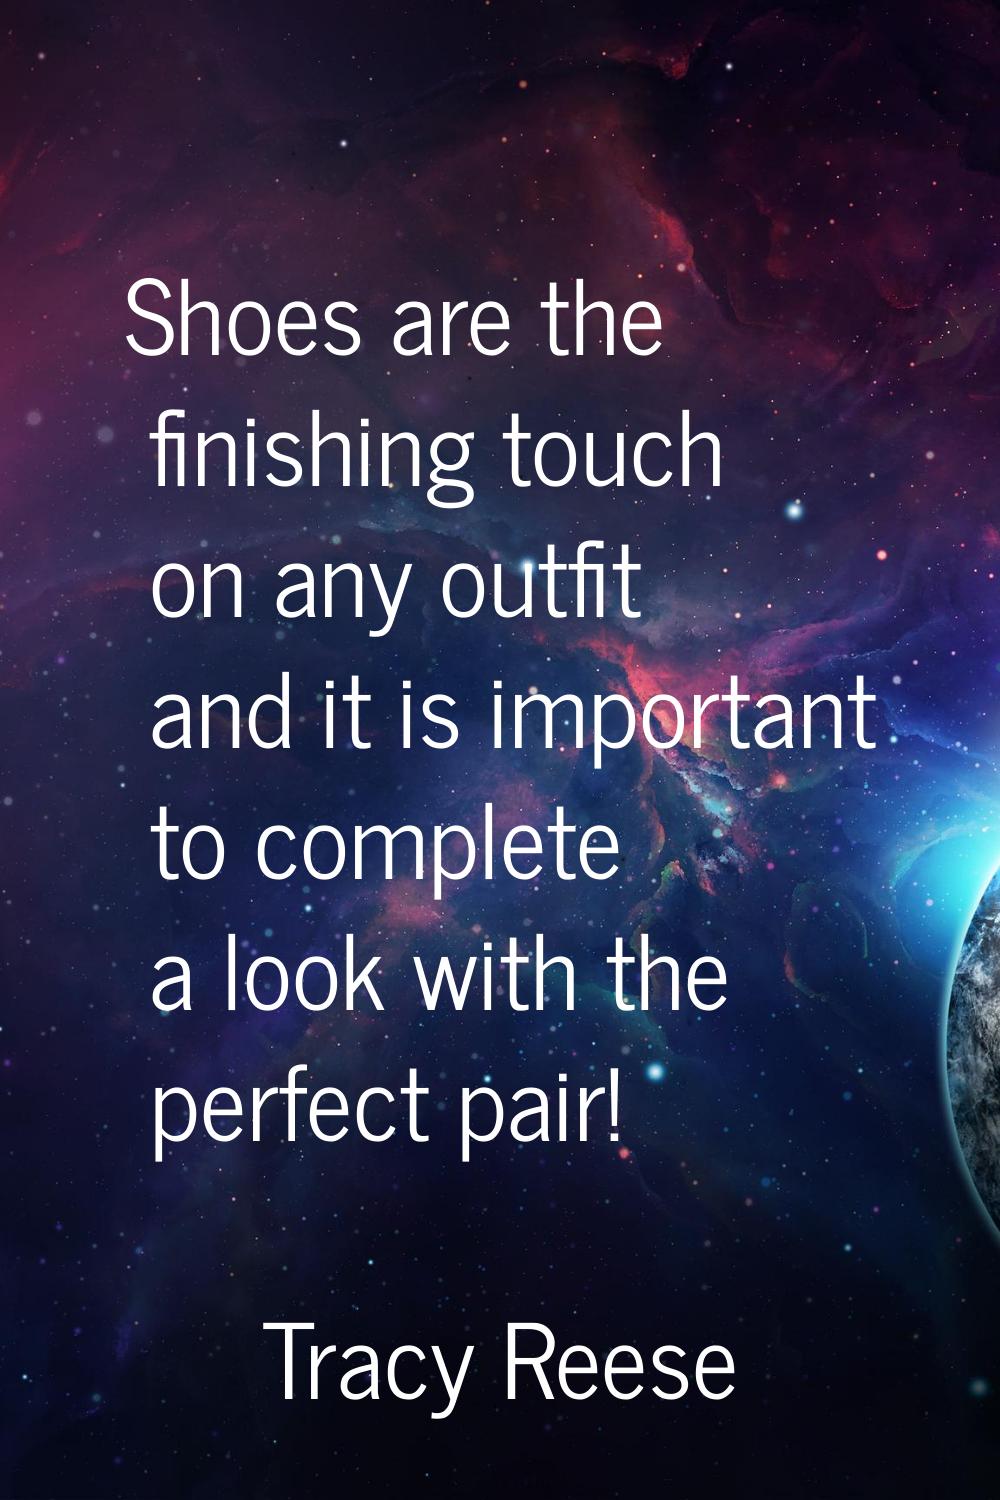 Shoes are the finishing touch on any outfit and it is important to complete a look with the perfect